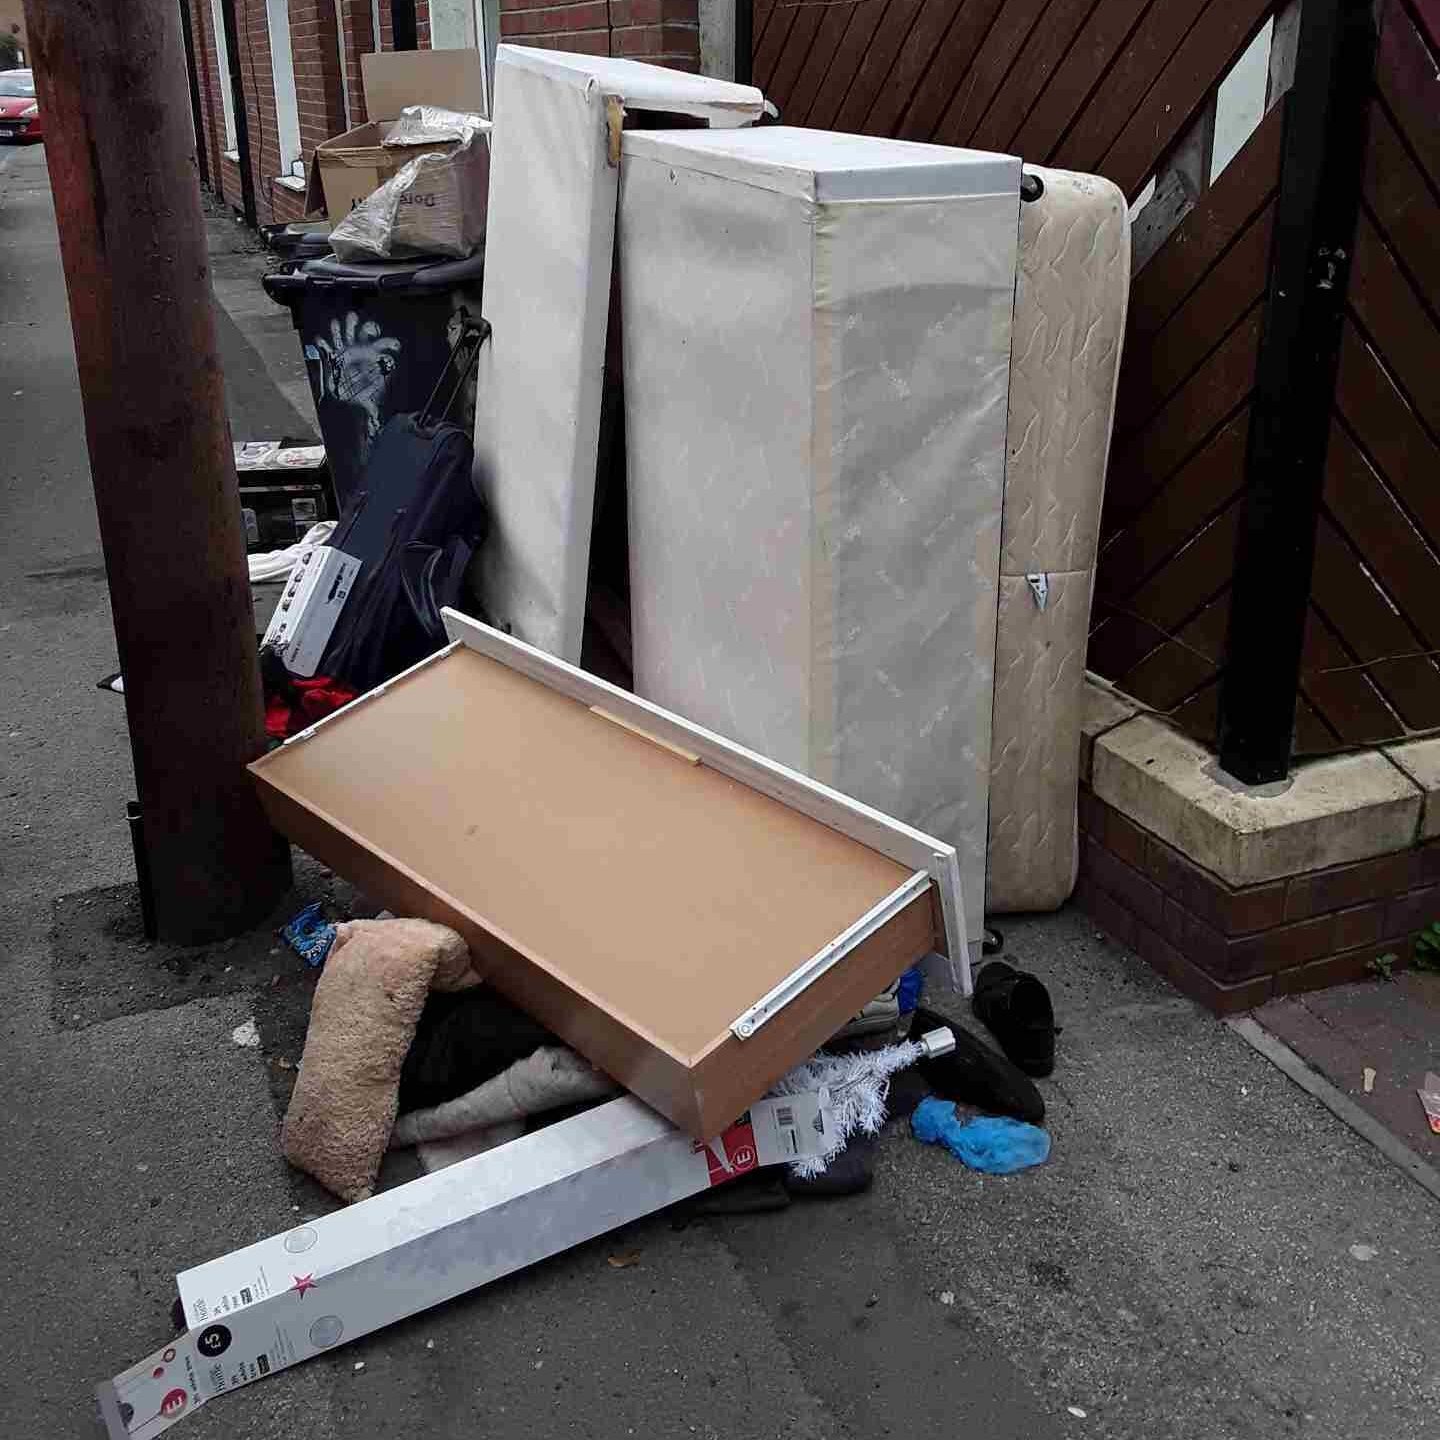 Waste fly-tipped by Patrycja Malow of Thirlmere Avenue, Wellsted Street, Hull.